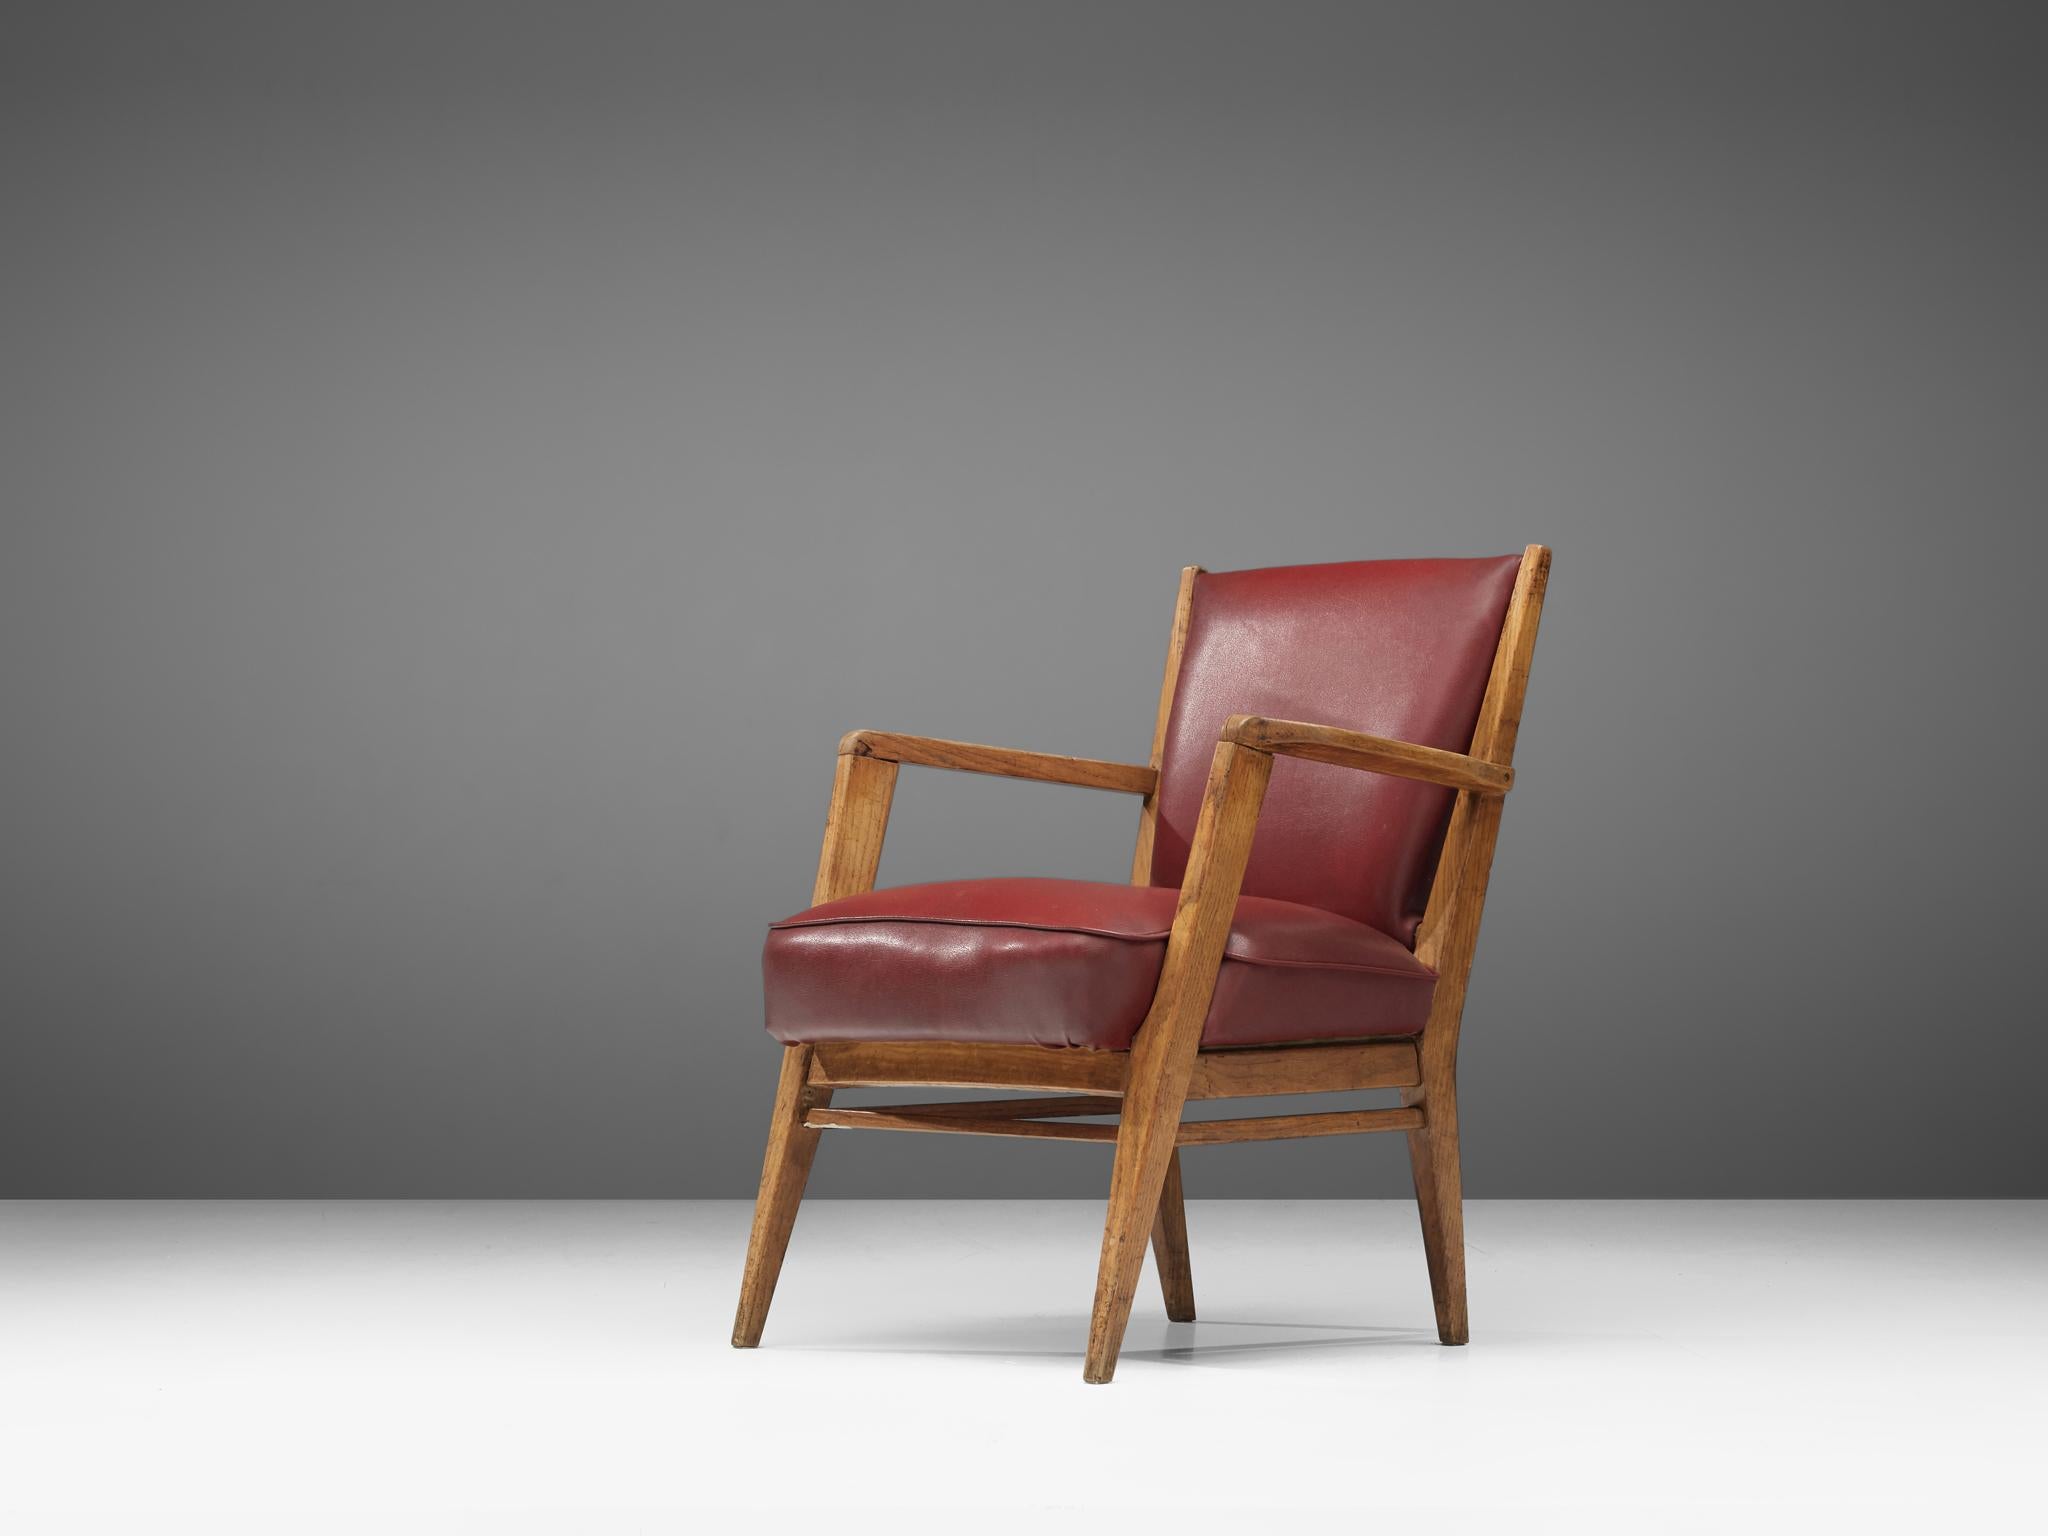 BBPR, armchair, skai leather and oak, Italy, 1950s.

This sculptural lounge chair is clearly a design by the architects of BBPR. The model with a wide seat has the characteristic, sculptural frame. The tapered and tilted legs with sharp edges are